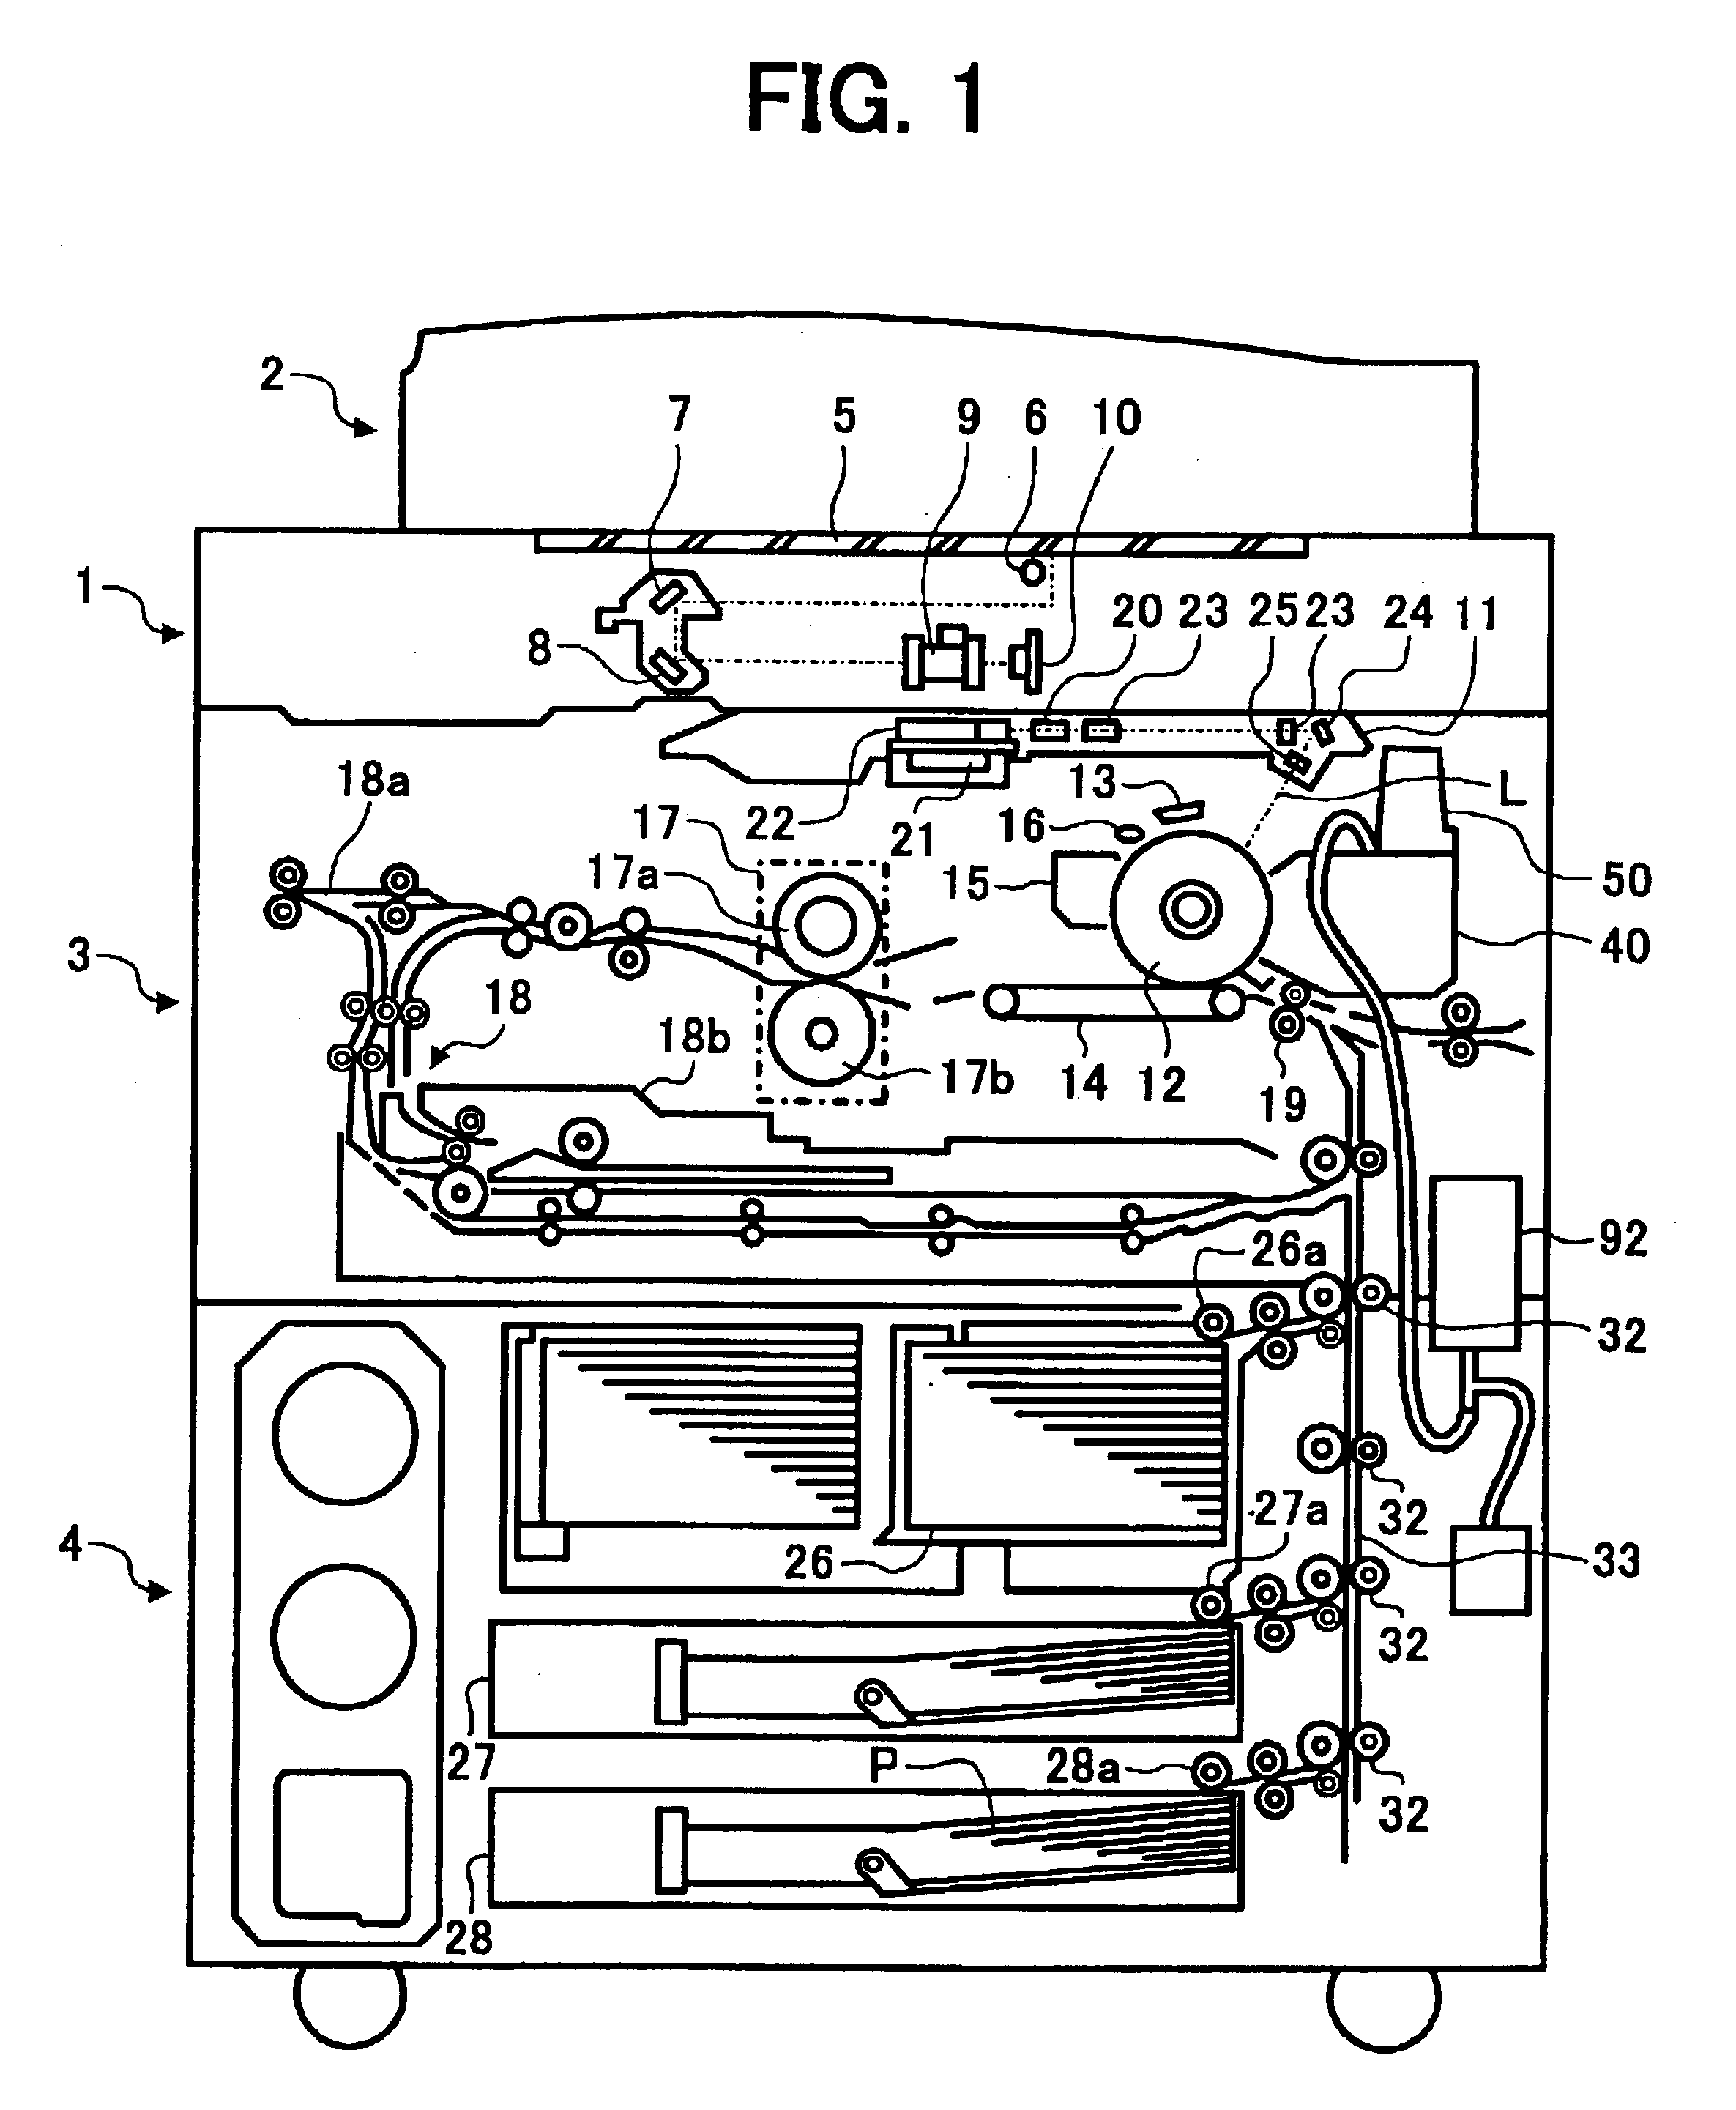 Toner conveying device and image forming apparatus including the toner conveying device